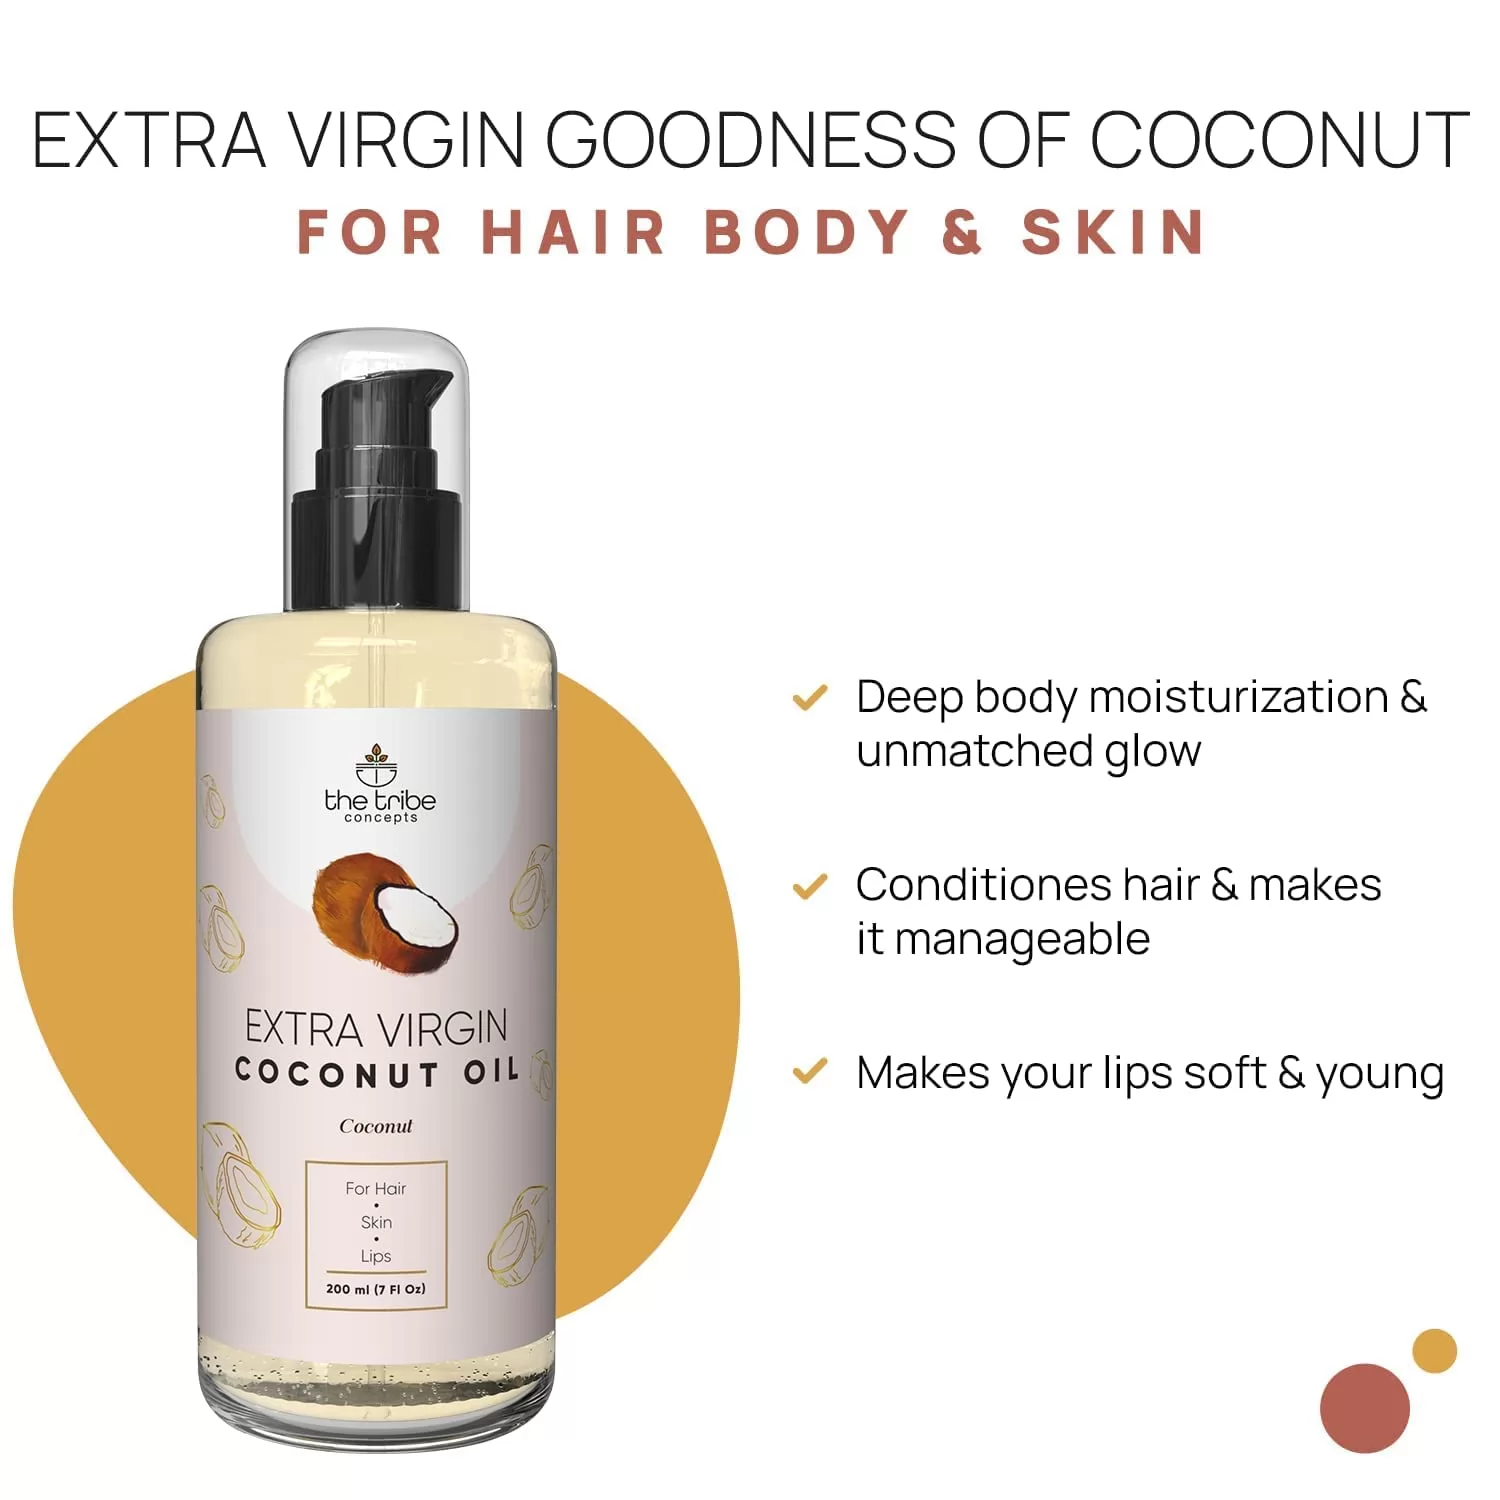  The Tribe Concepts Extra Virgin Coconut Oil